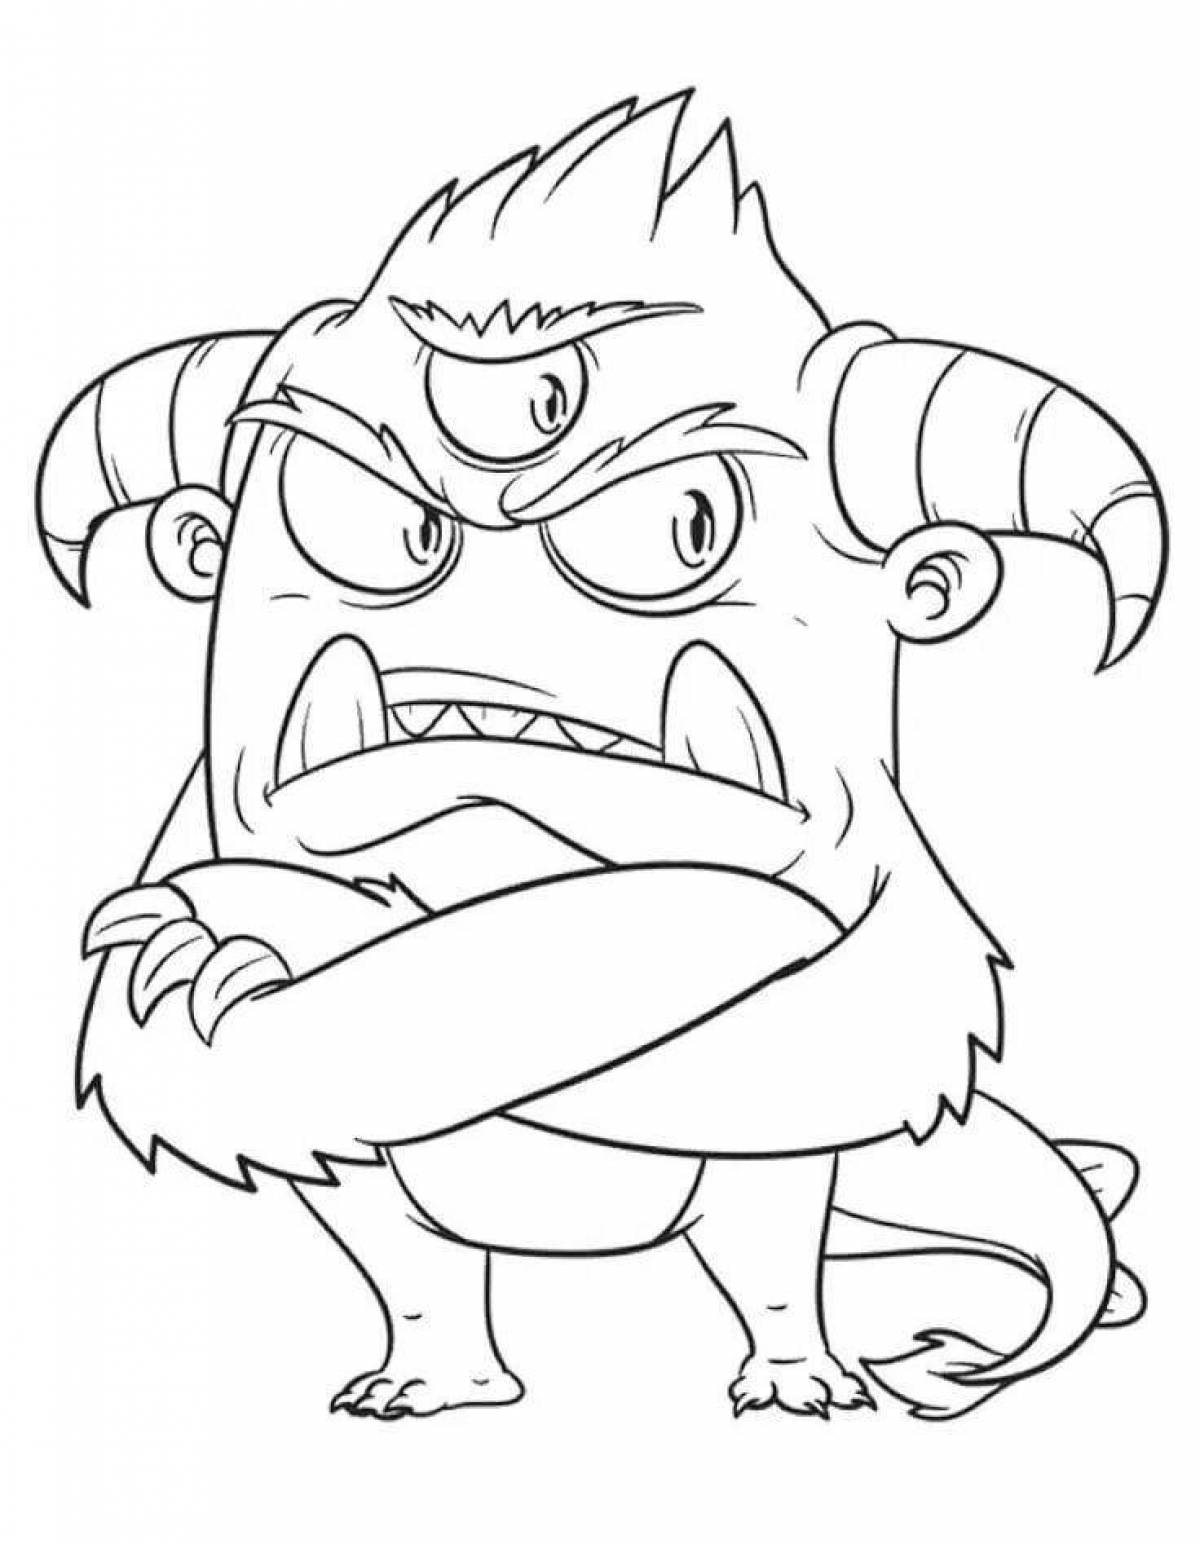 Scary monster coloring page